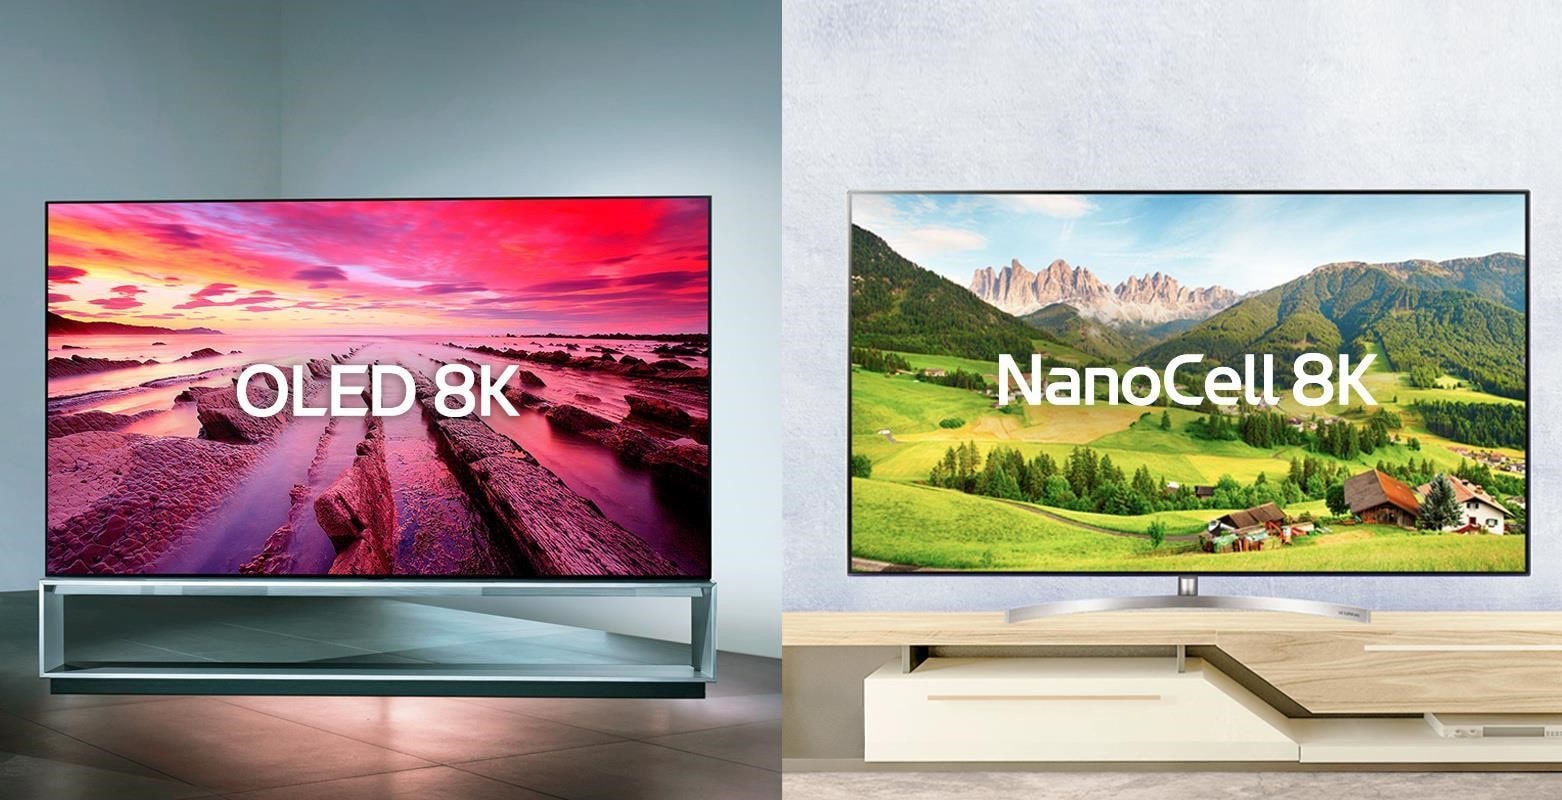 Side-by-side comparison of an OLED 8K TV and NanoCell 8K TV.